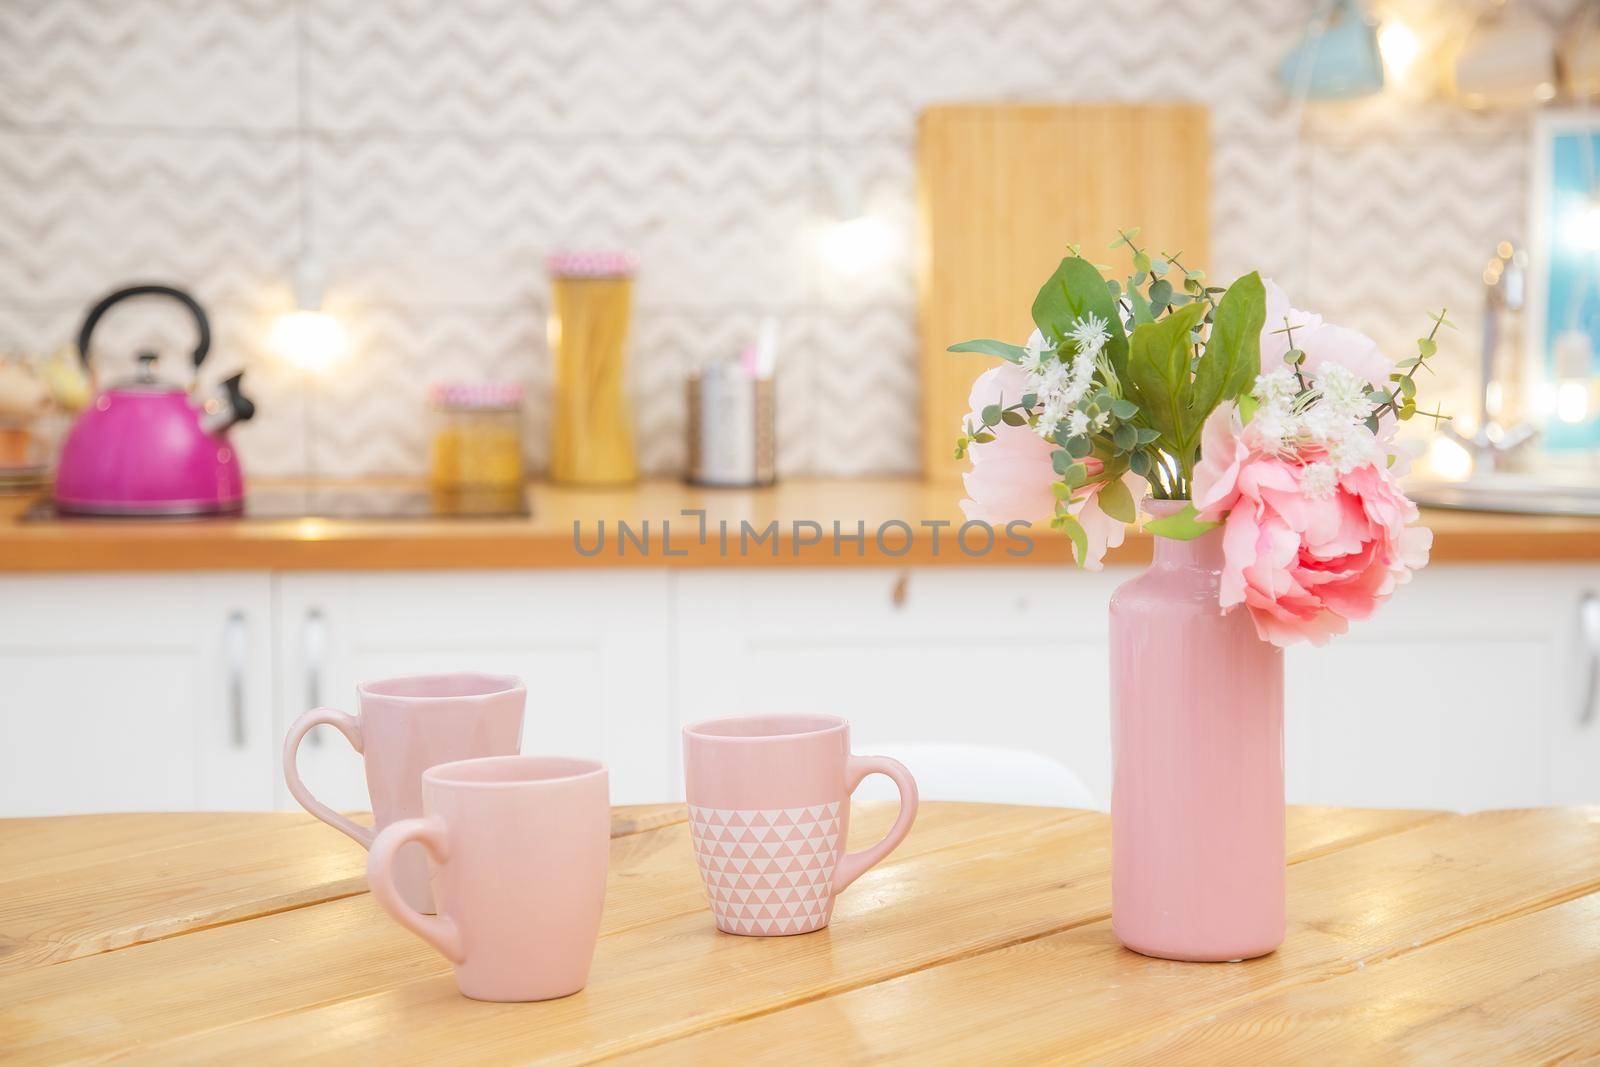 Pink vase with flowers and mugs for tea on the table in a light kitchen by galinasharapova